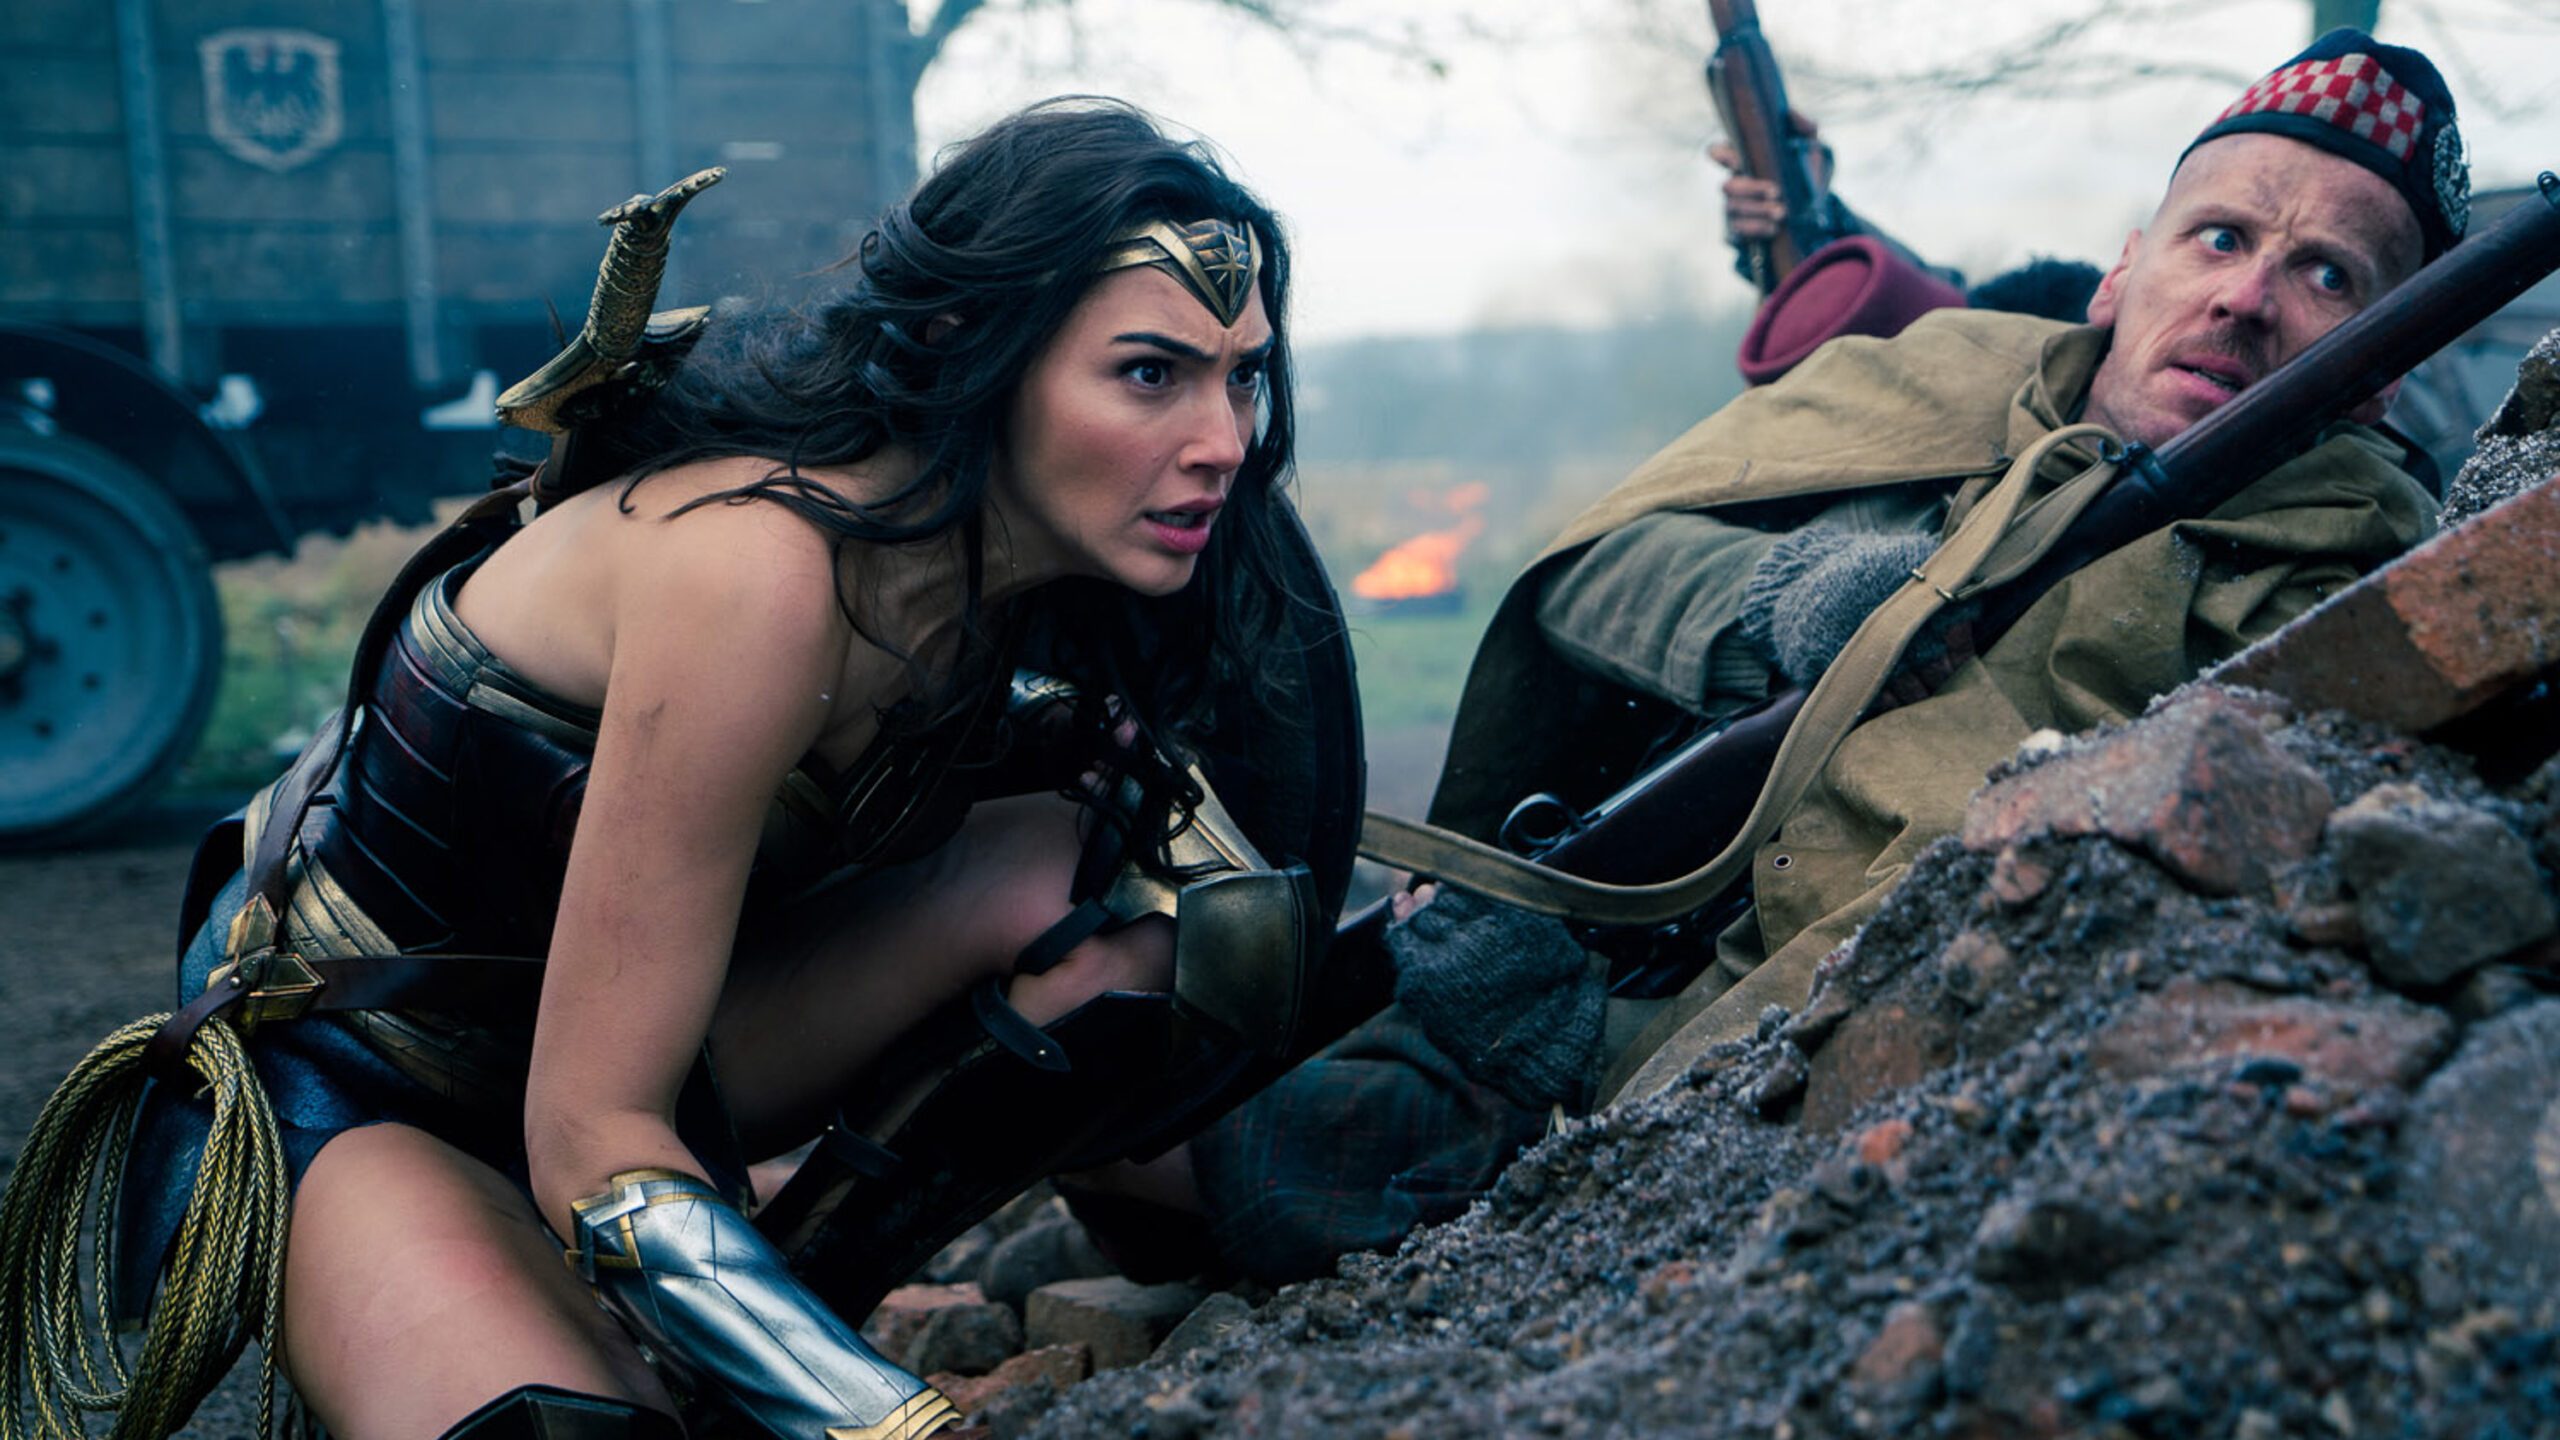 ‘Wonder Woman’ grosses P48.39M on PH opening day